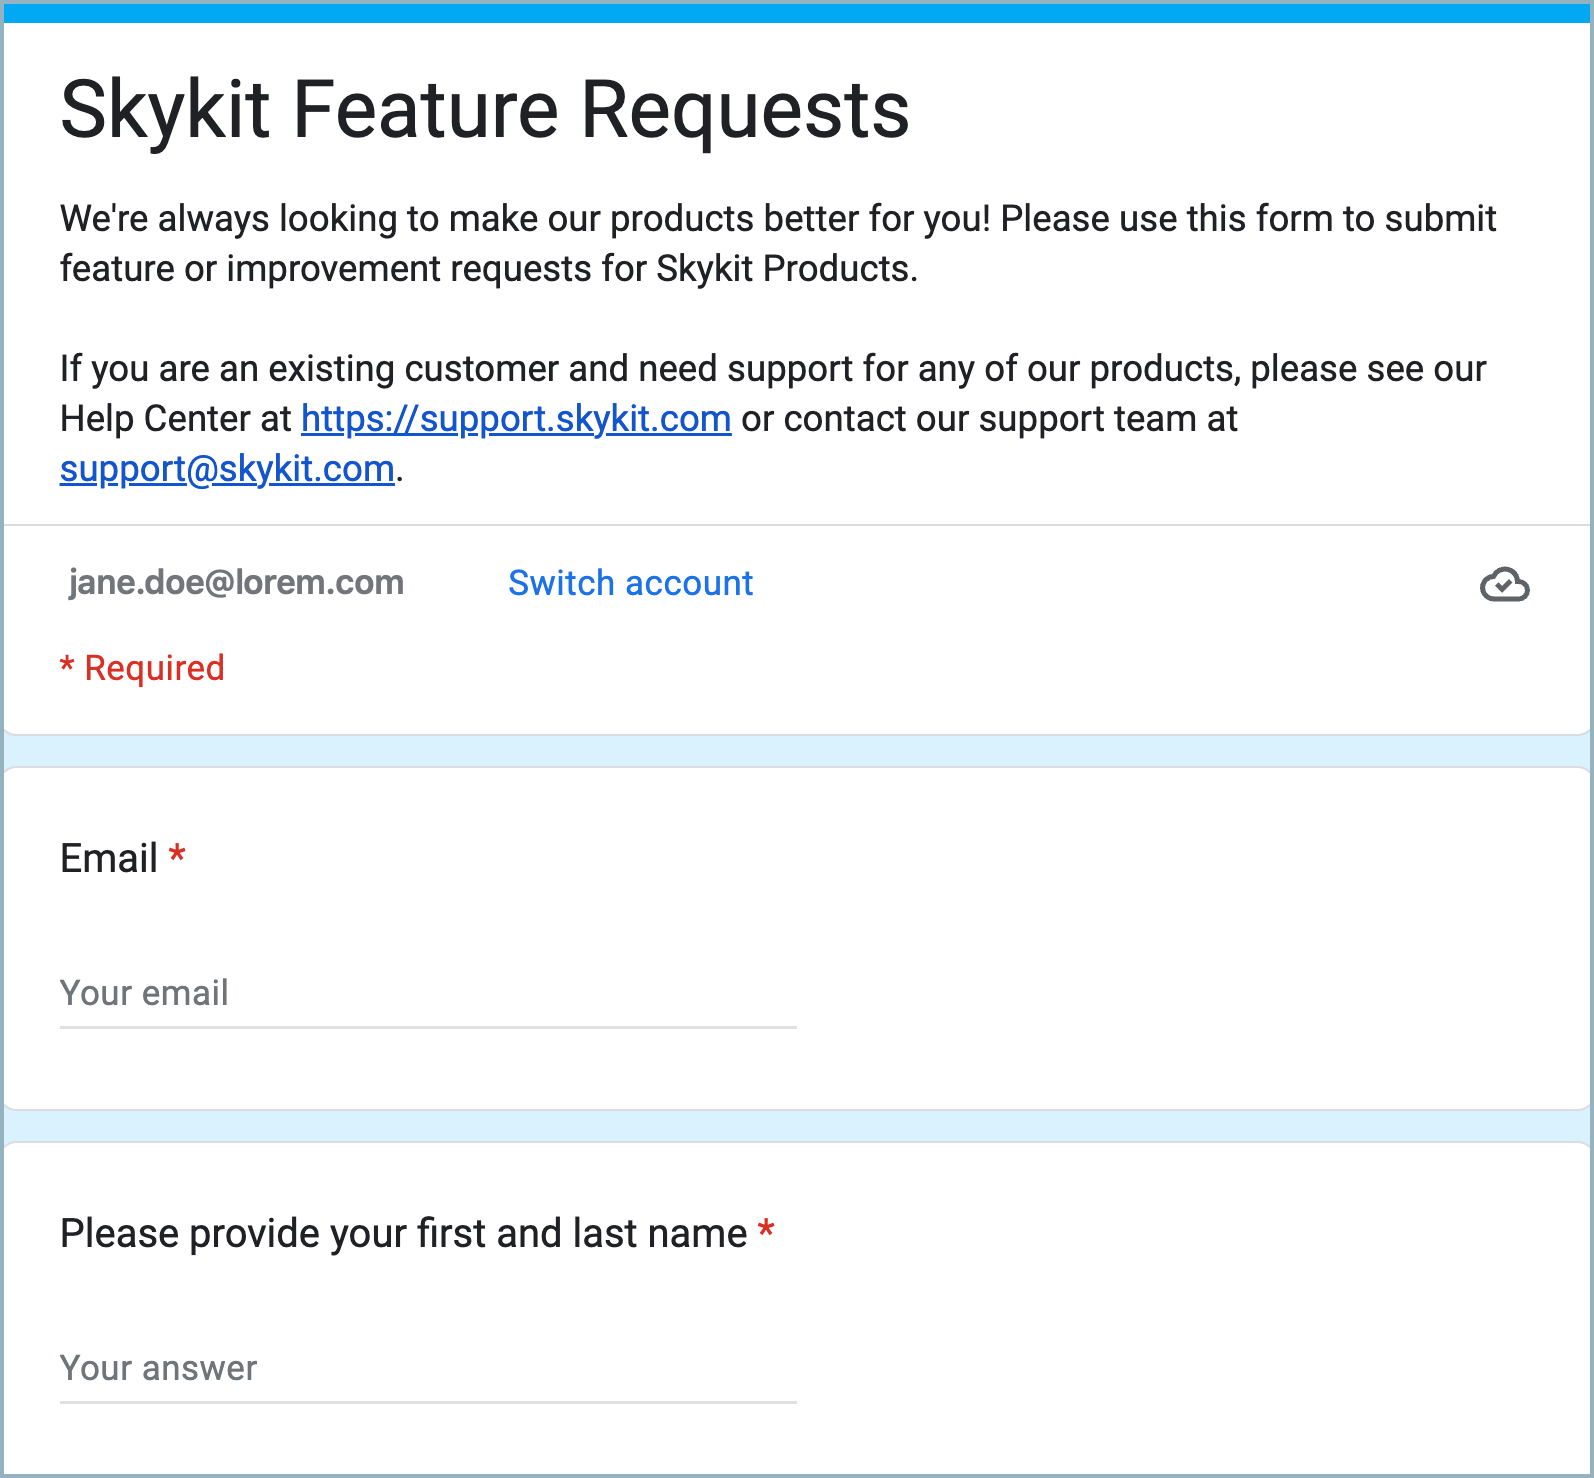 Skykit Features Request form